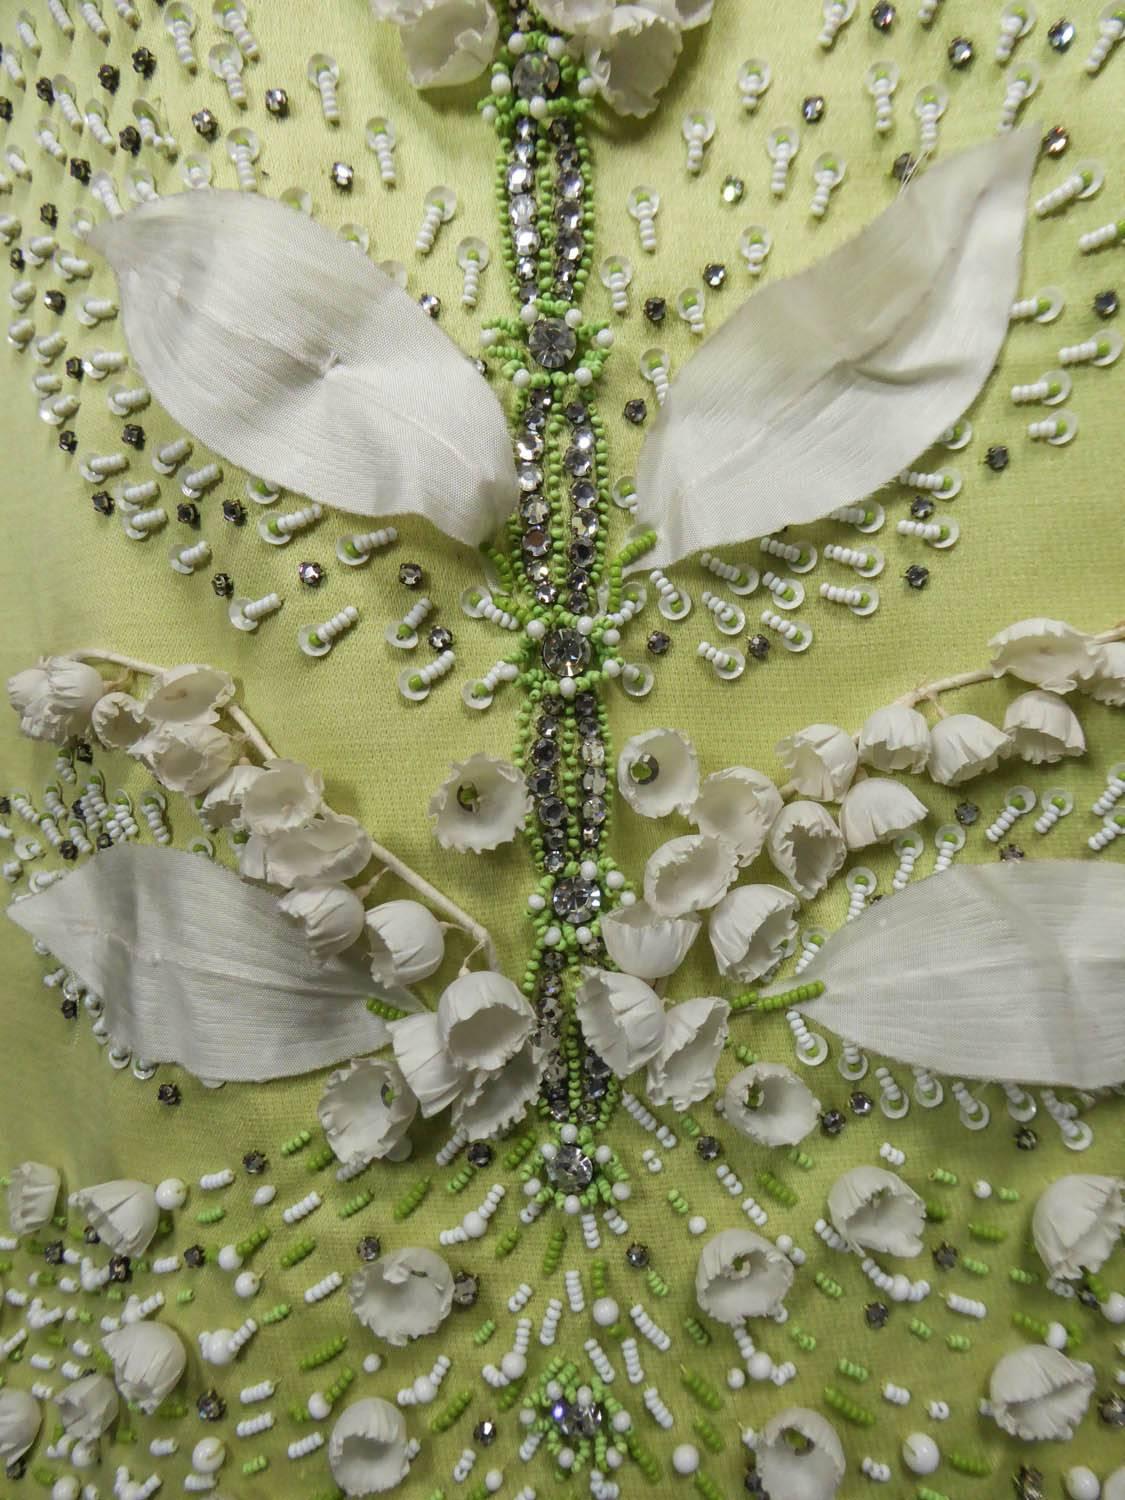 Women's Gazar Italy evening dress embroidered with lily of the valley, circa 1965